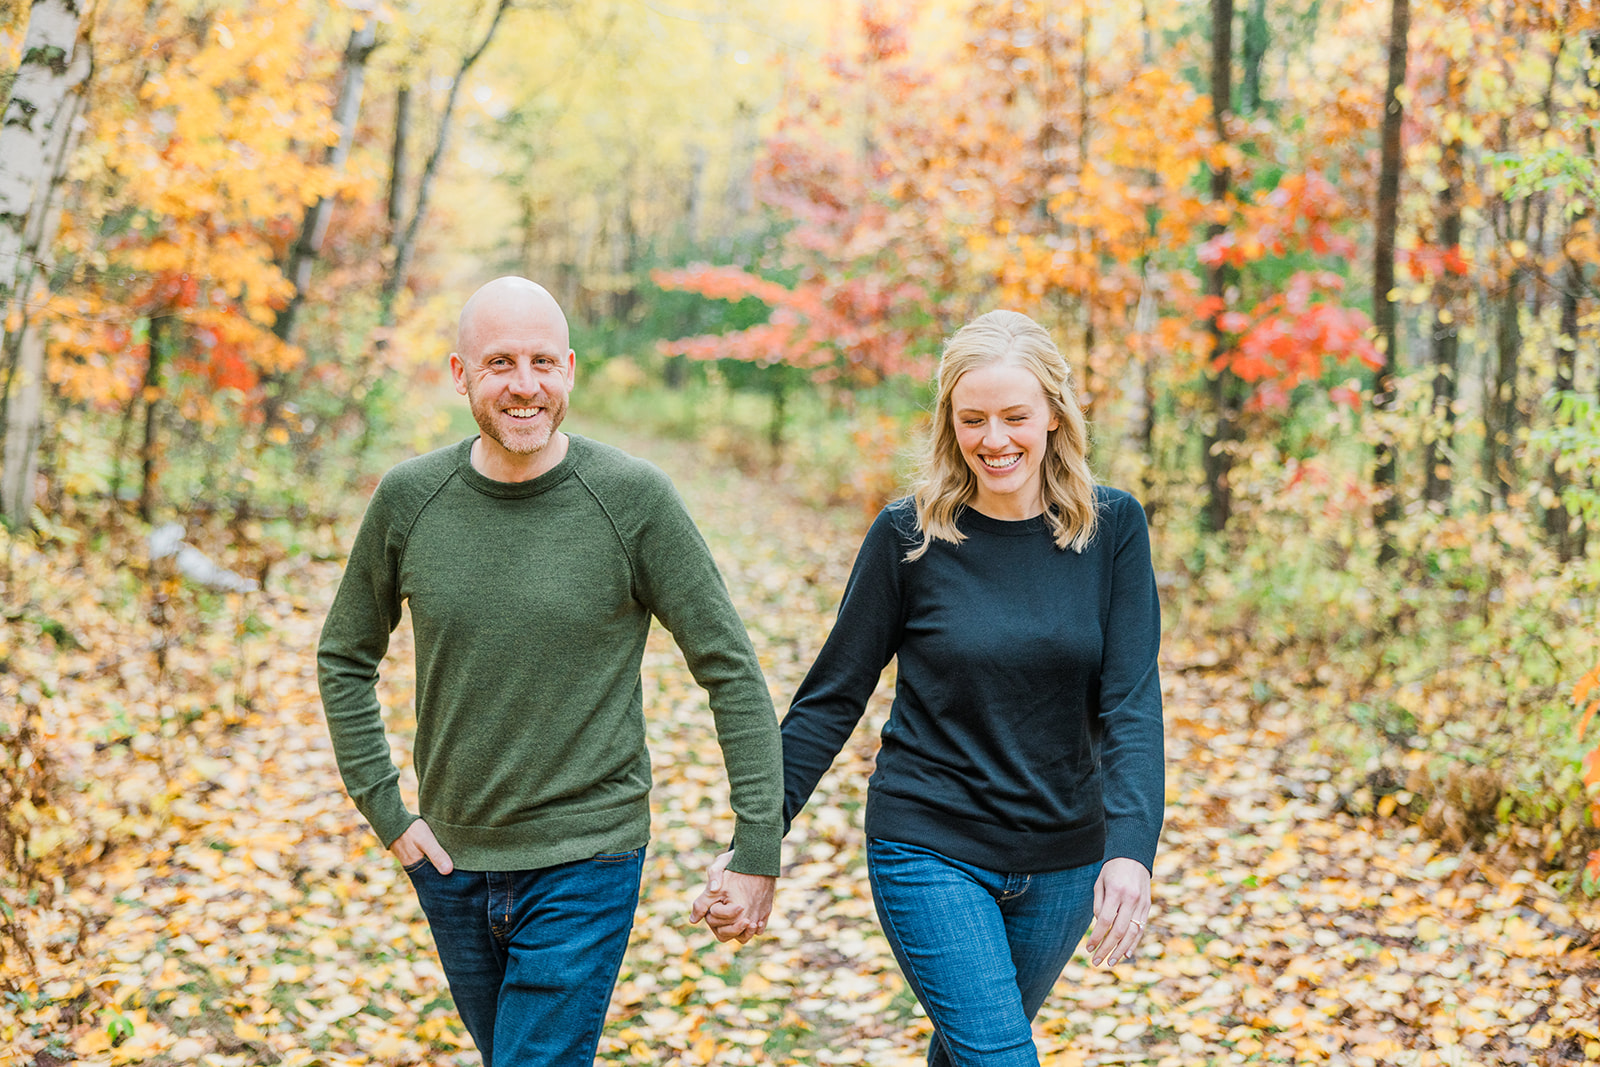 Fall engagement session ideas